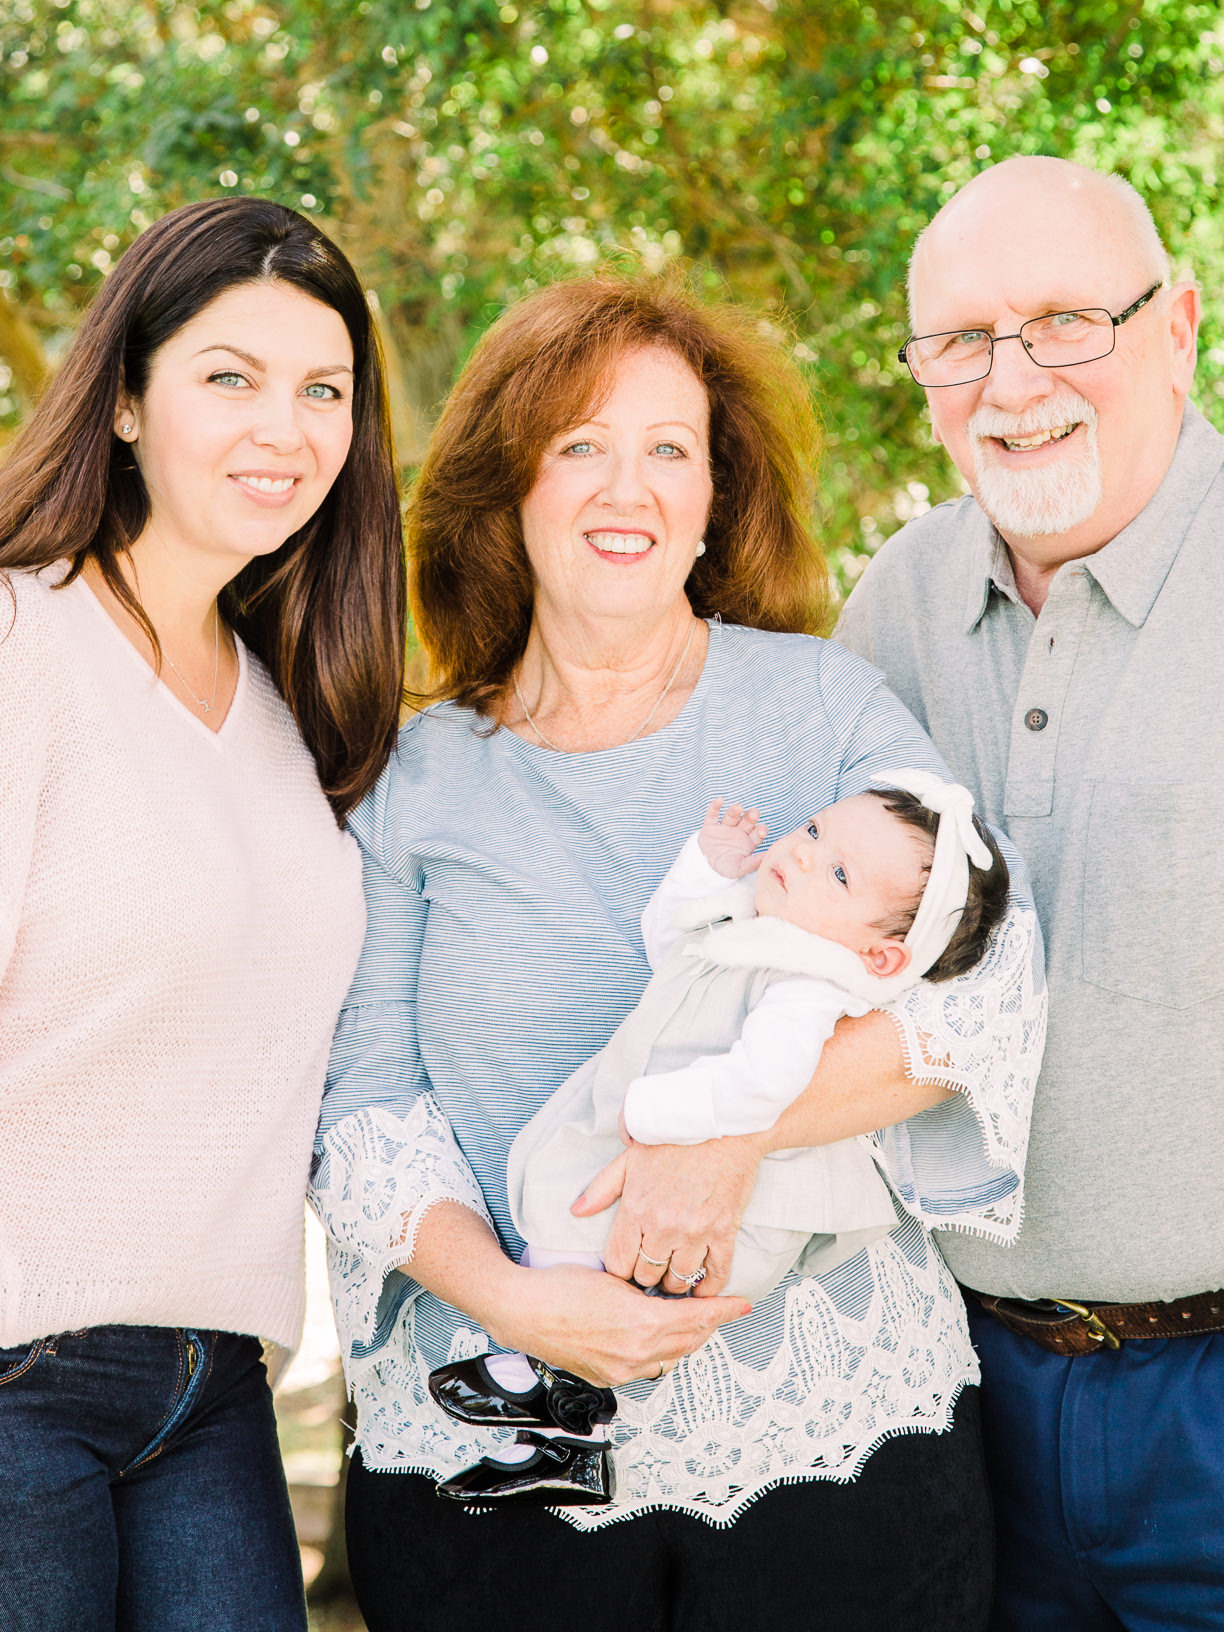 Russell Family Portraits - Valley Park, Hermosa Beach, CA